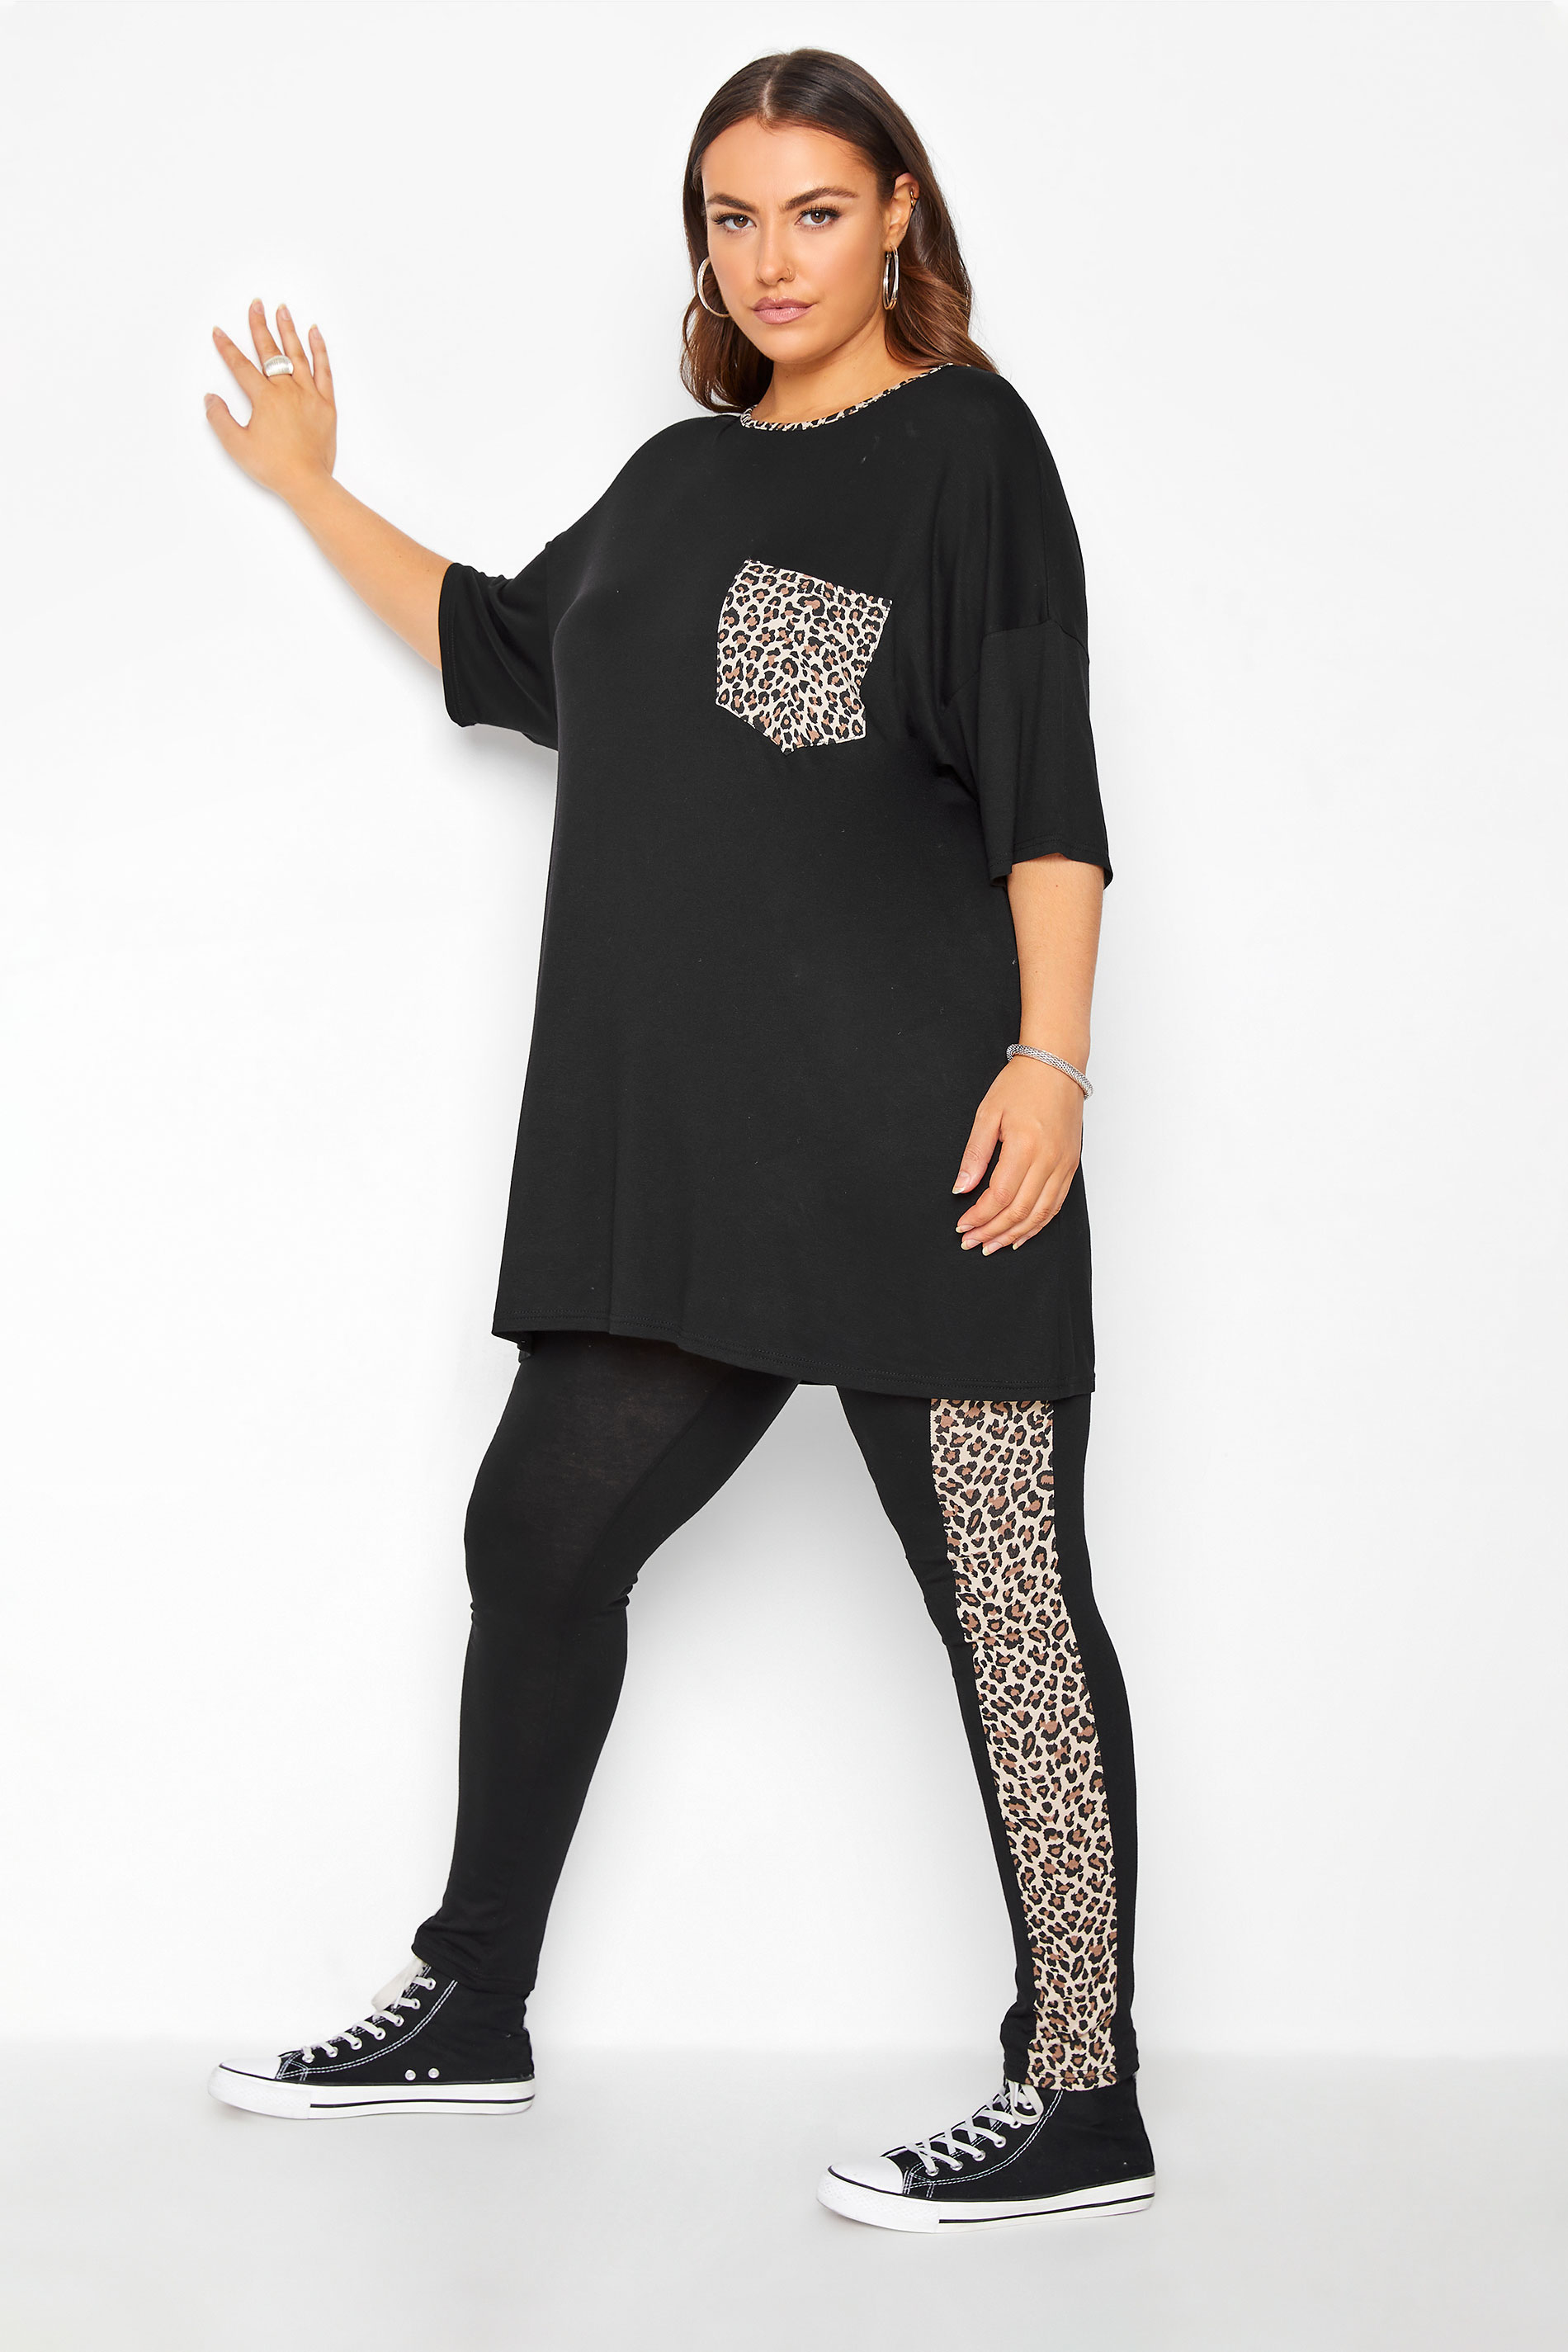 Plus Size LIMITED COLLECTION Black Leopard Print Stripe Leggings | Yours Clothing 2